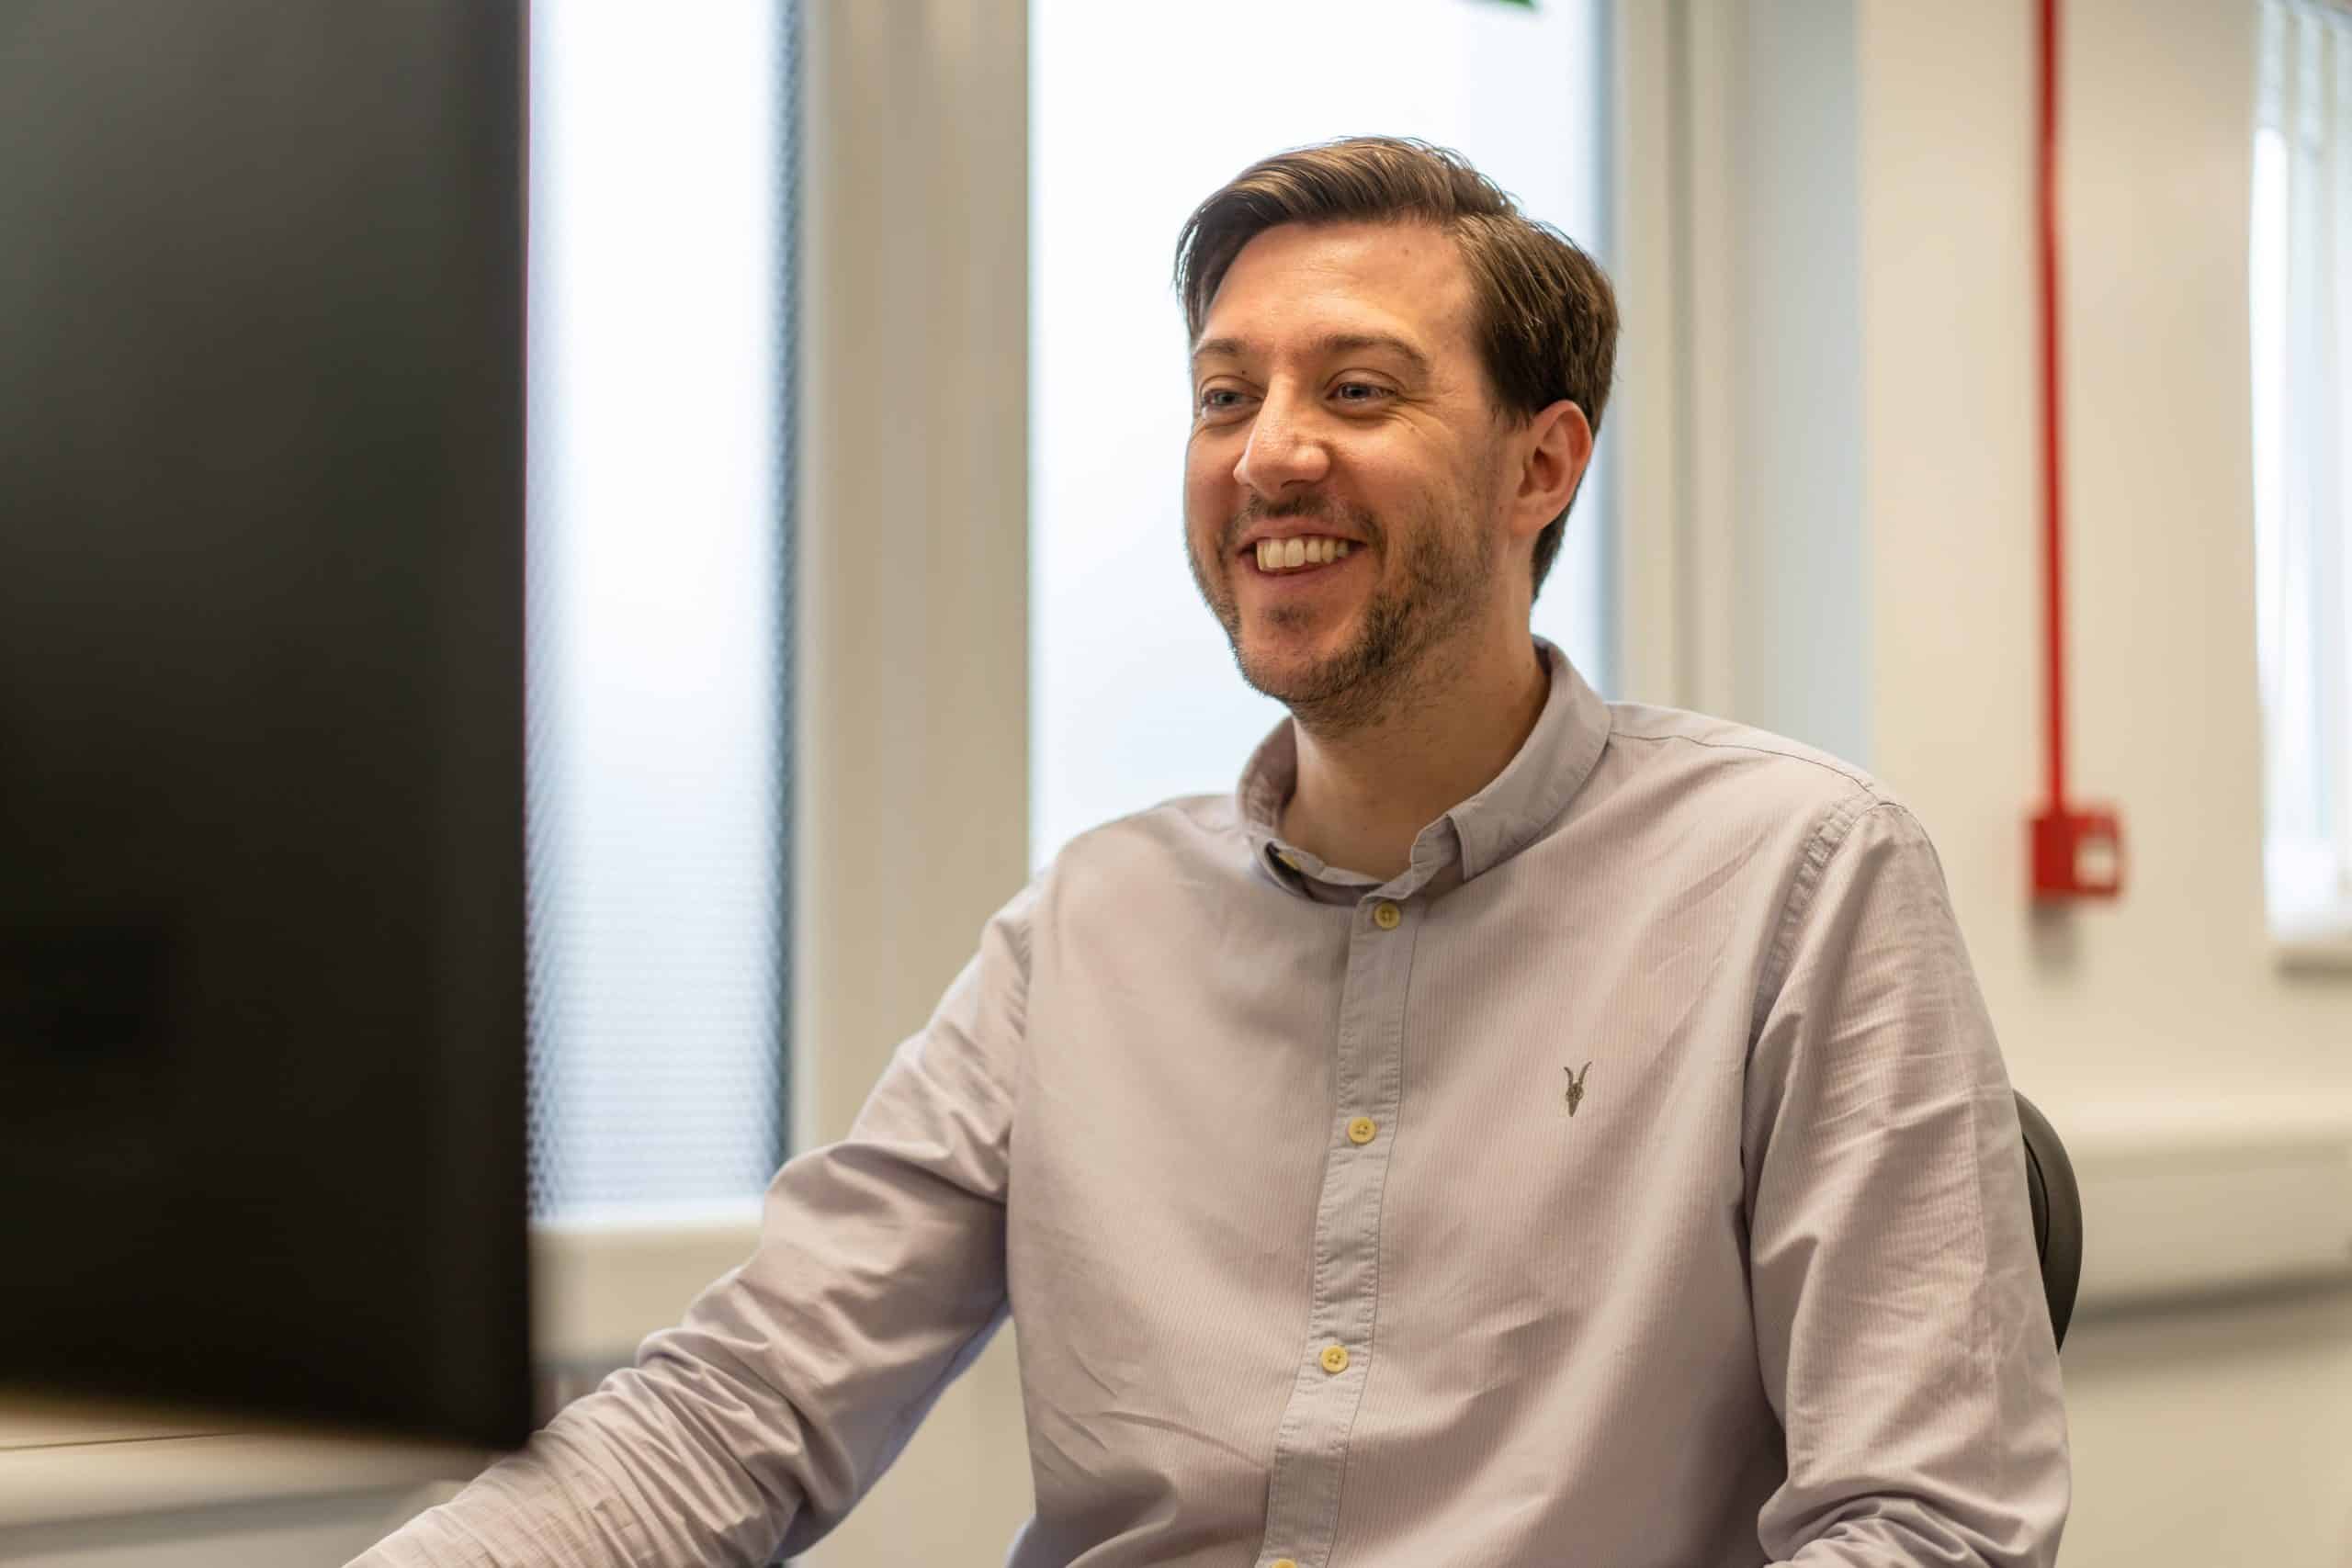 ILECS Spotlight: Lewis Brooks, from Apprentice to Marketing Manager